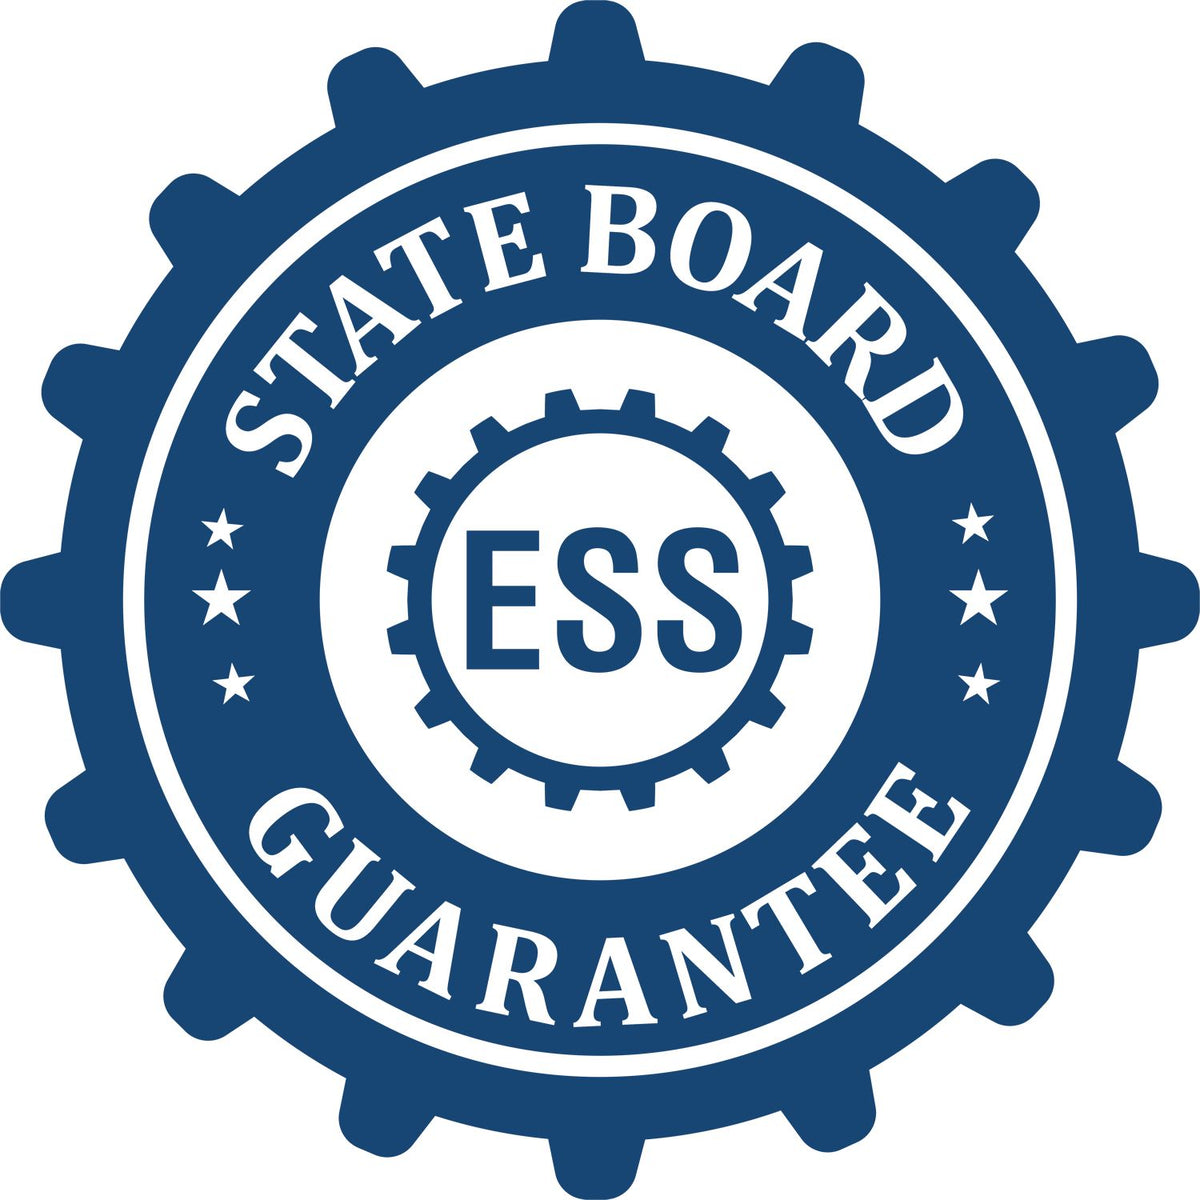 An emblem in a gear shape illustrating a state board guarantee for the Wooden Handle New Hampshire State Seal Notary Public Stamp product.